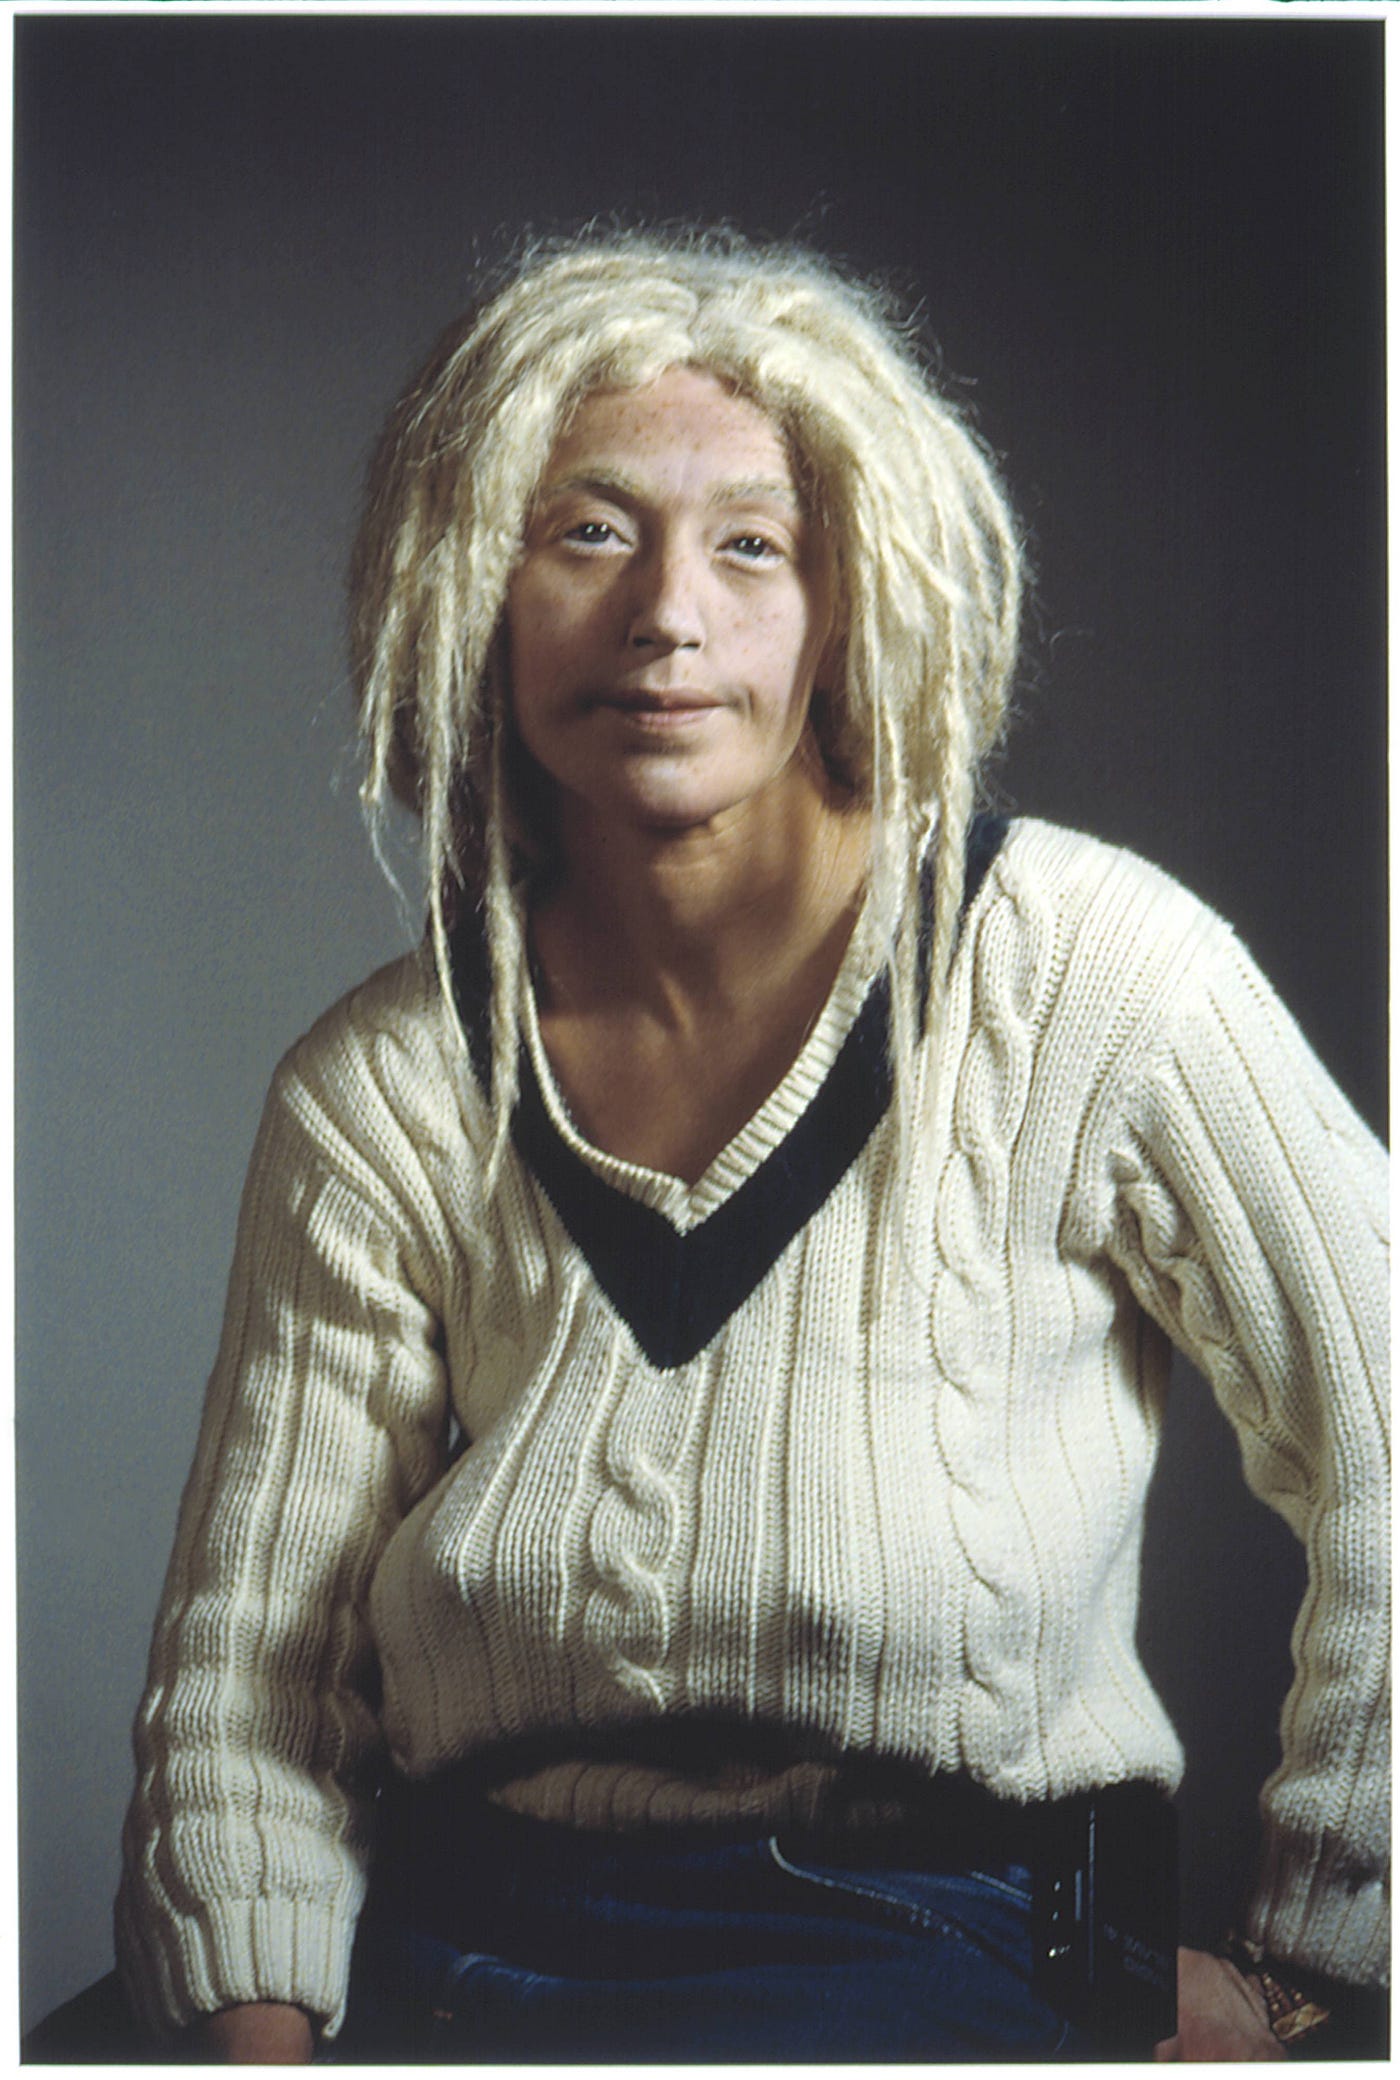 Cindy Sherman: 'I enjoy doing the really difficult things that